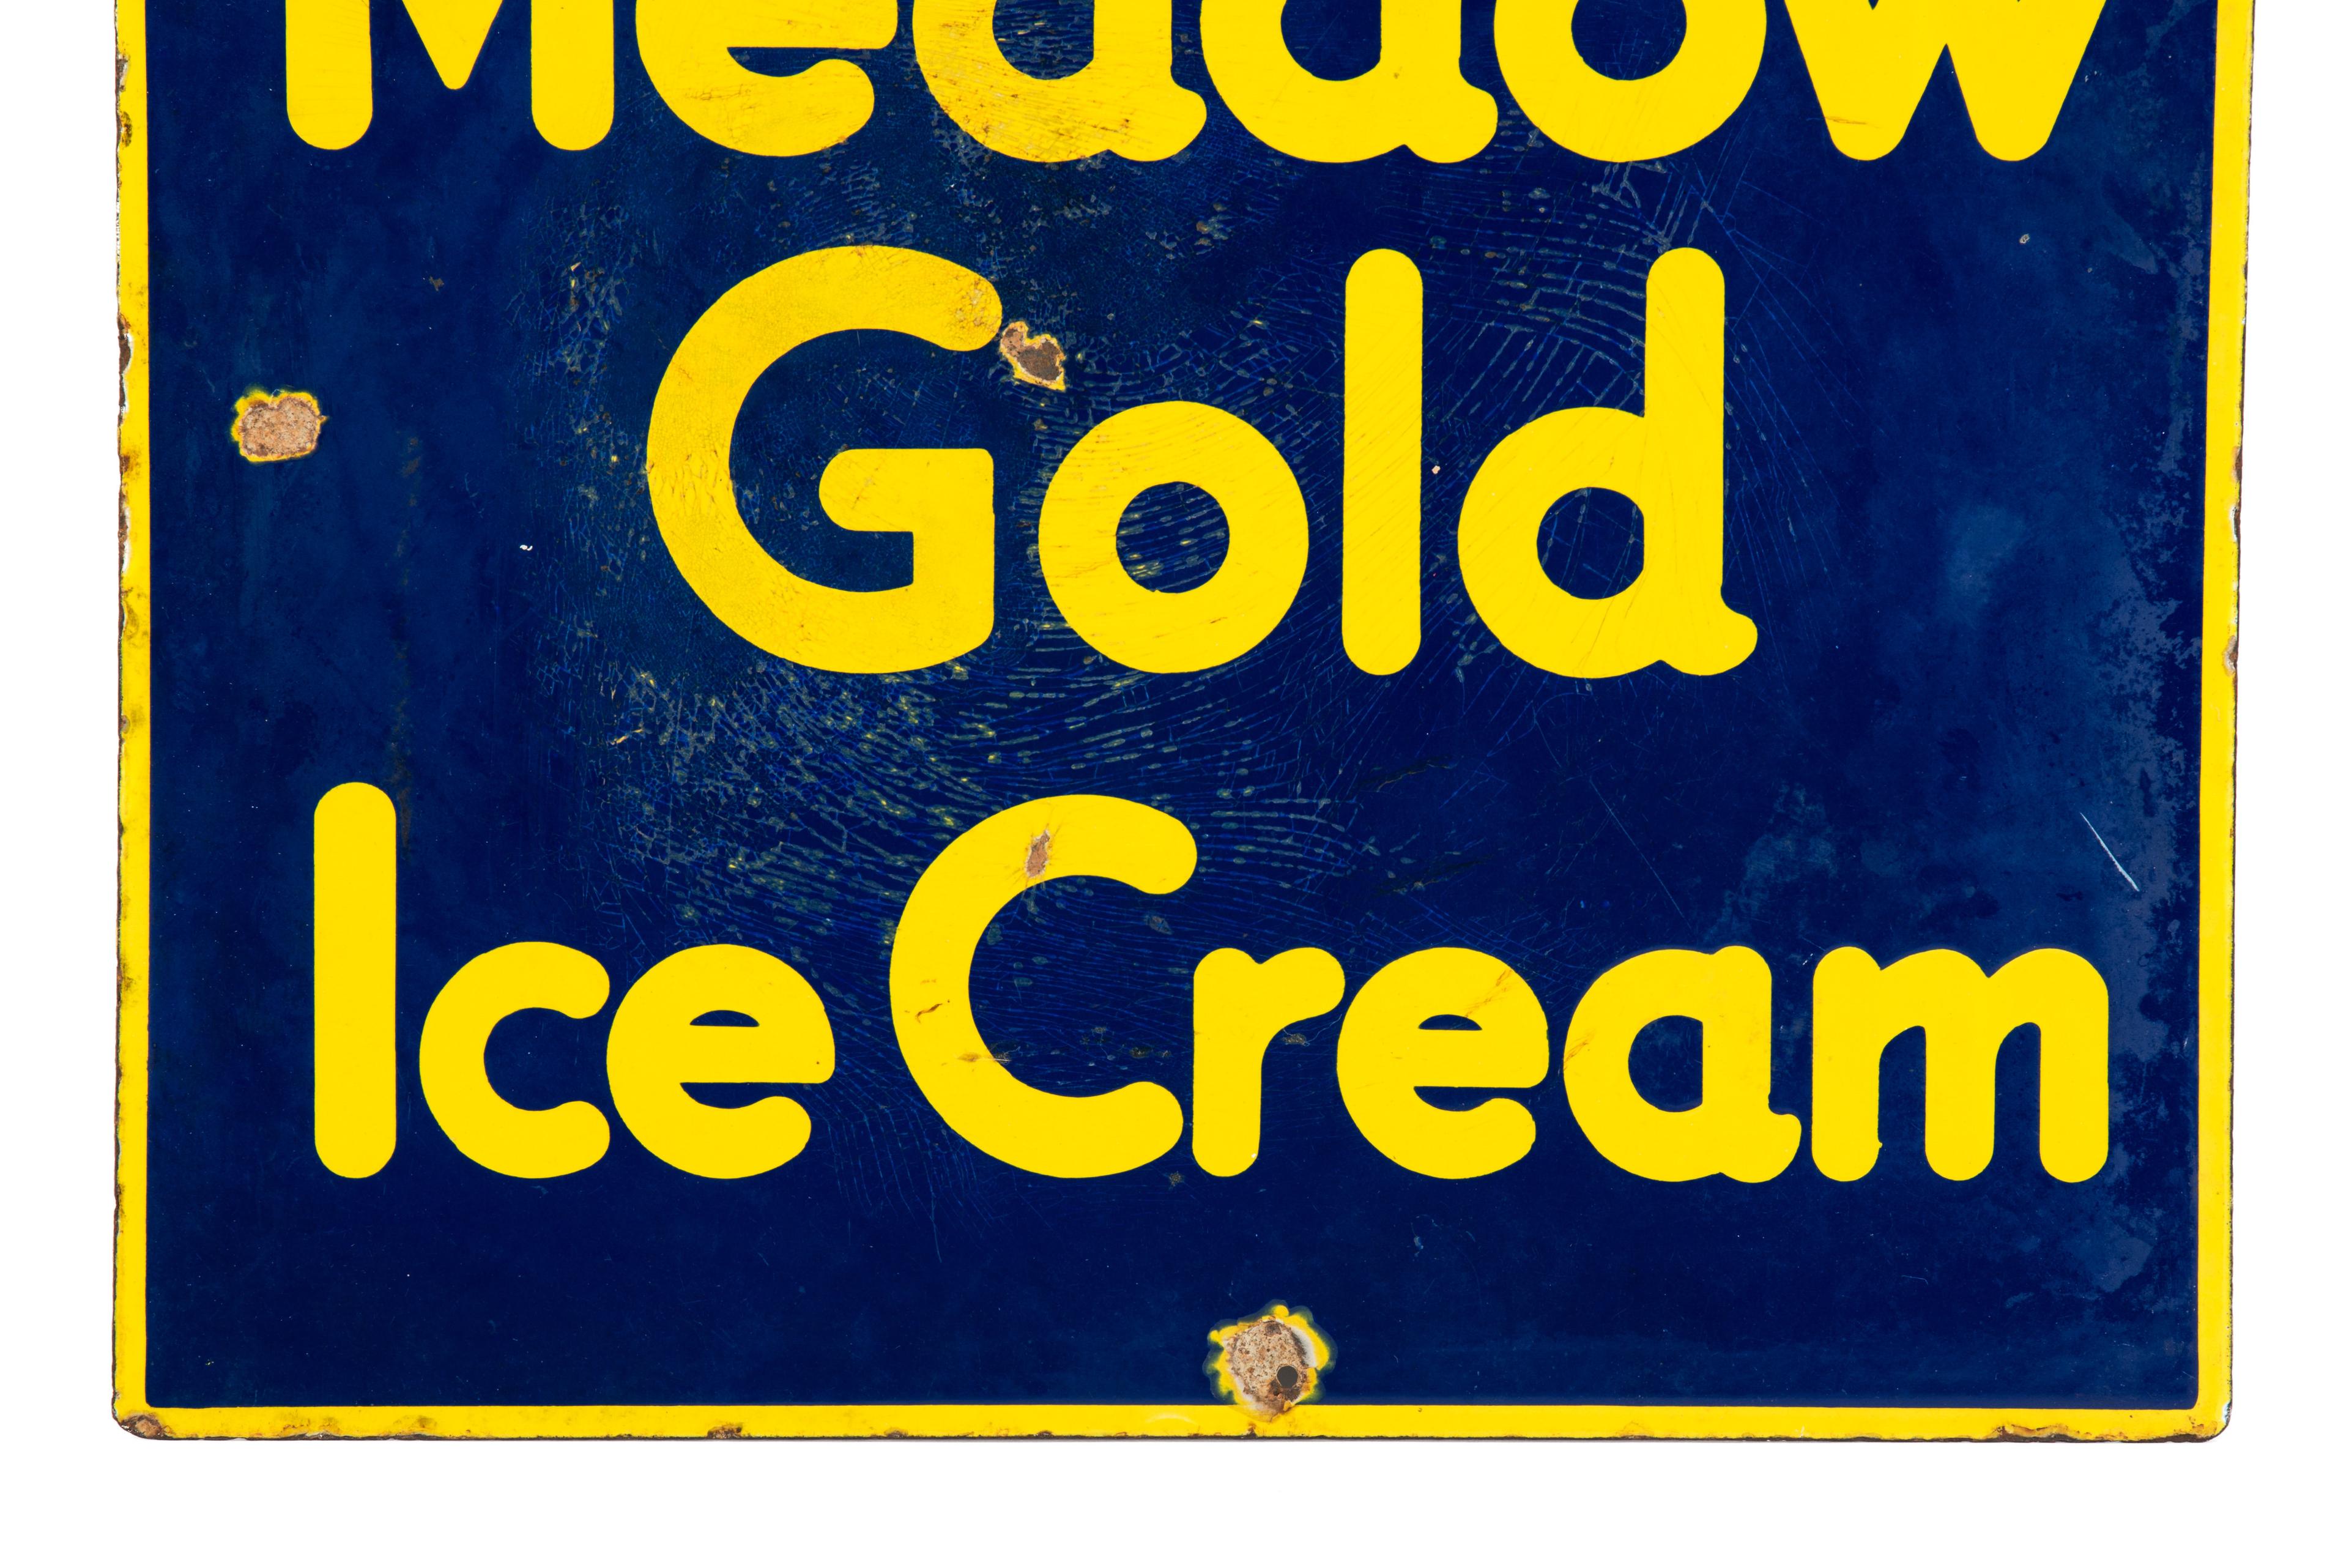 Meadow Gold Ice Cream Porcelain Sign